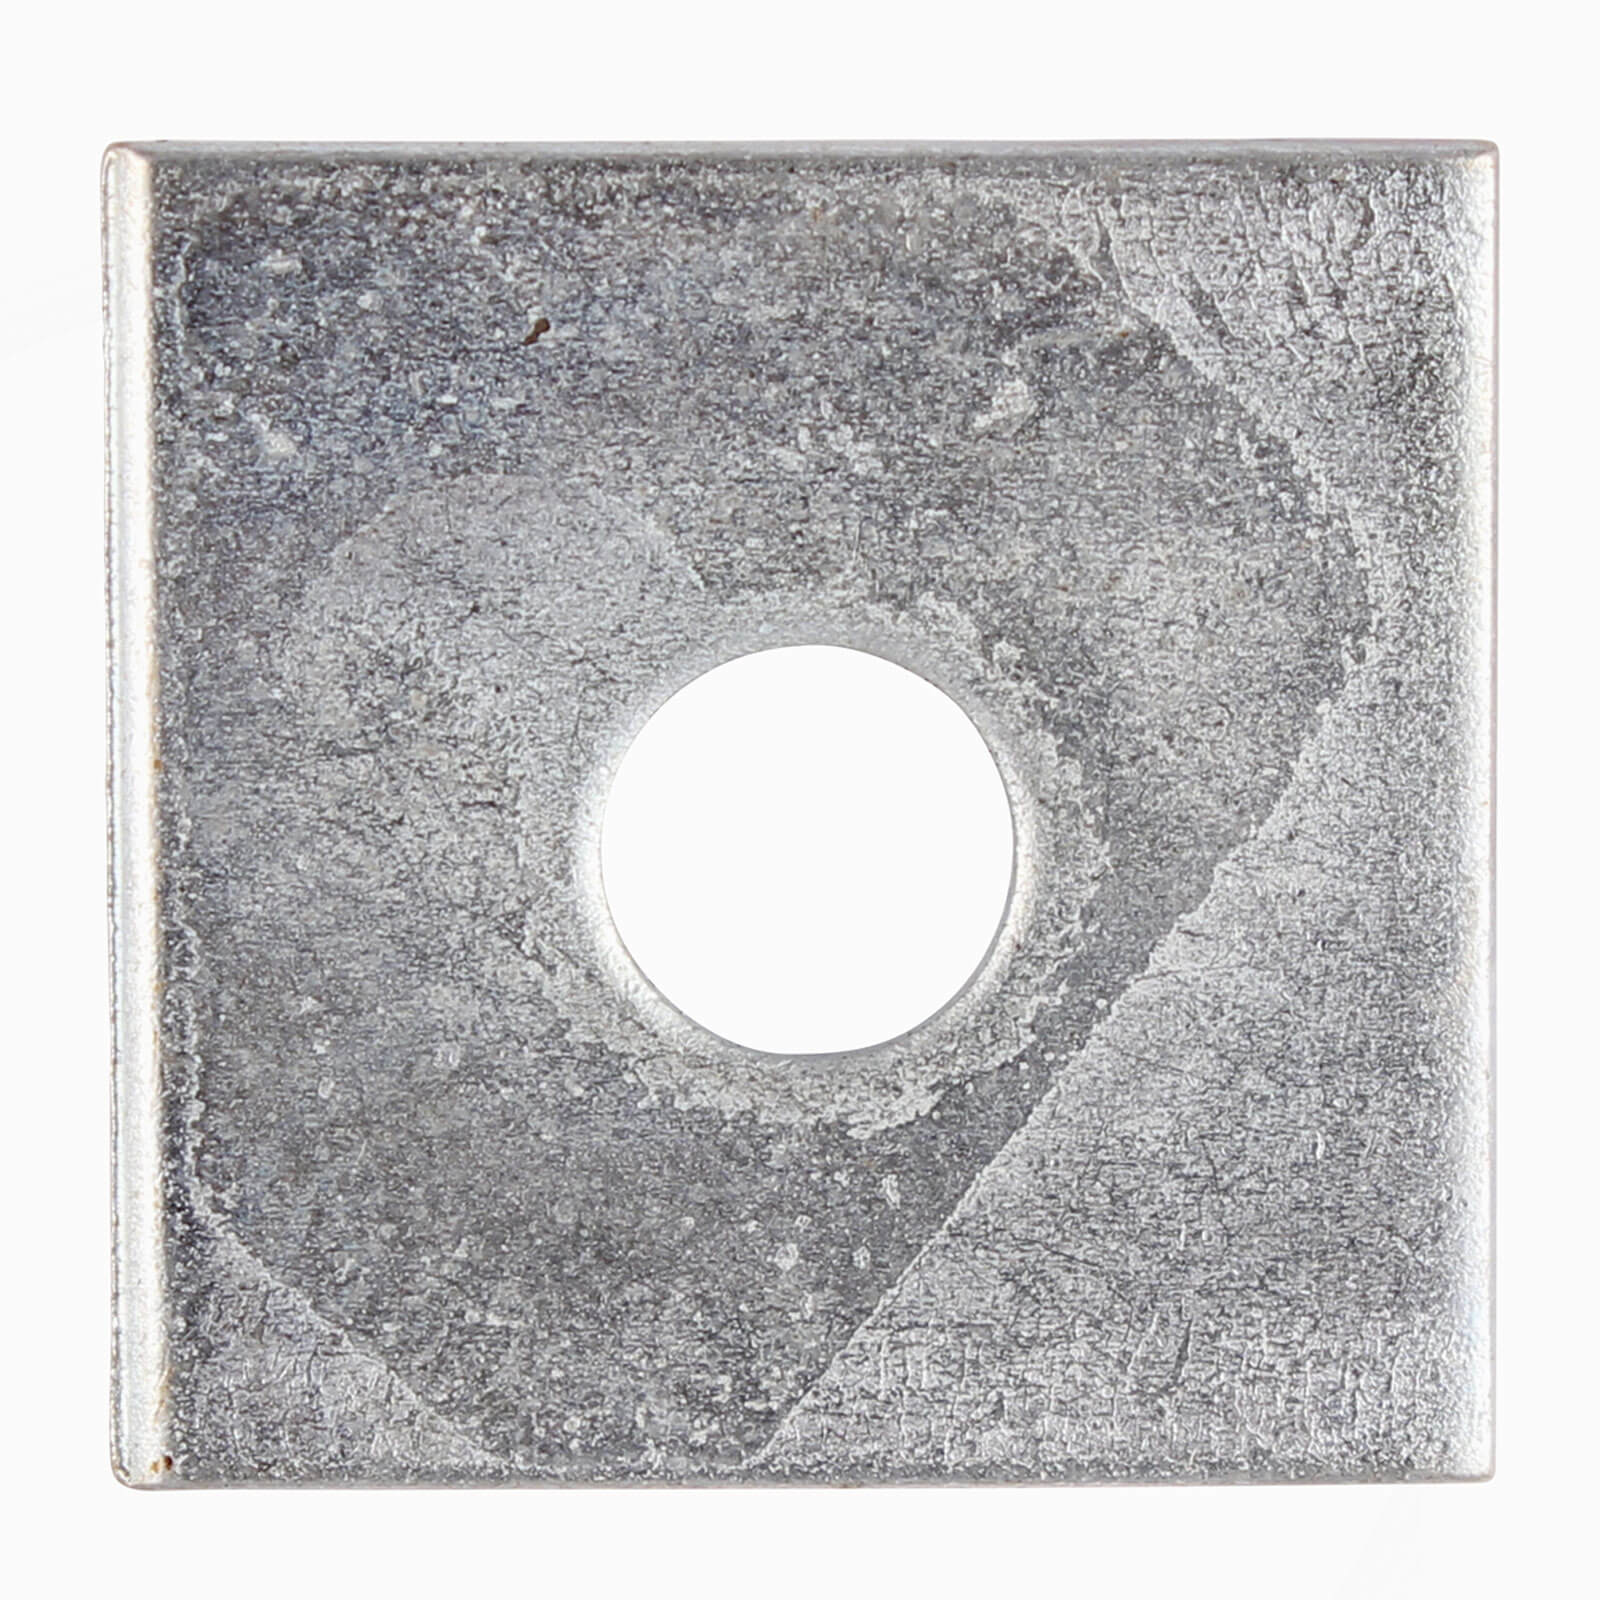 Image of Square Plate Washer Zinc Plated 10mm 50mm Pack of 2